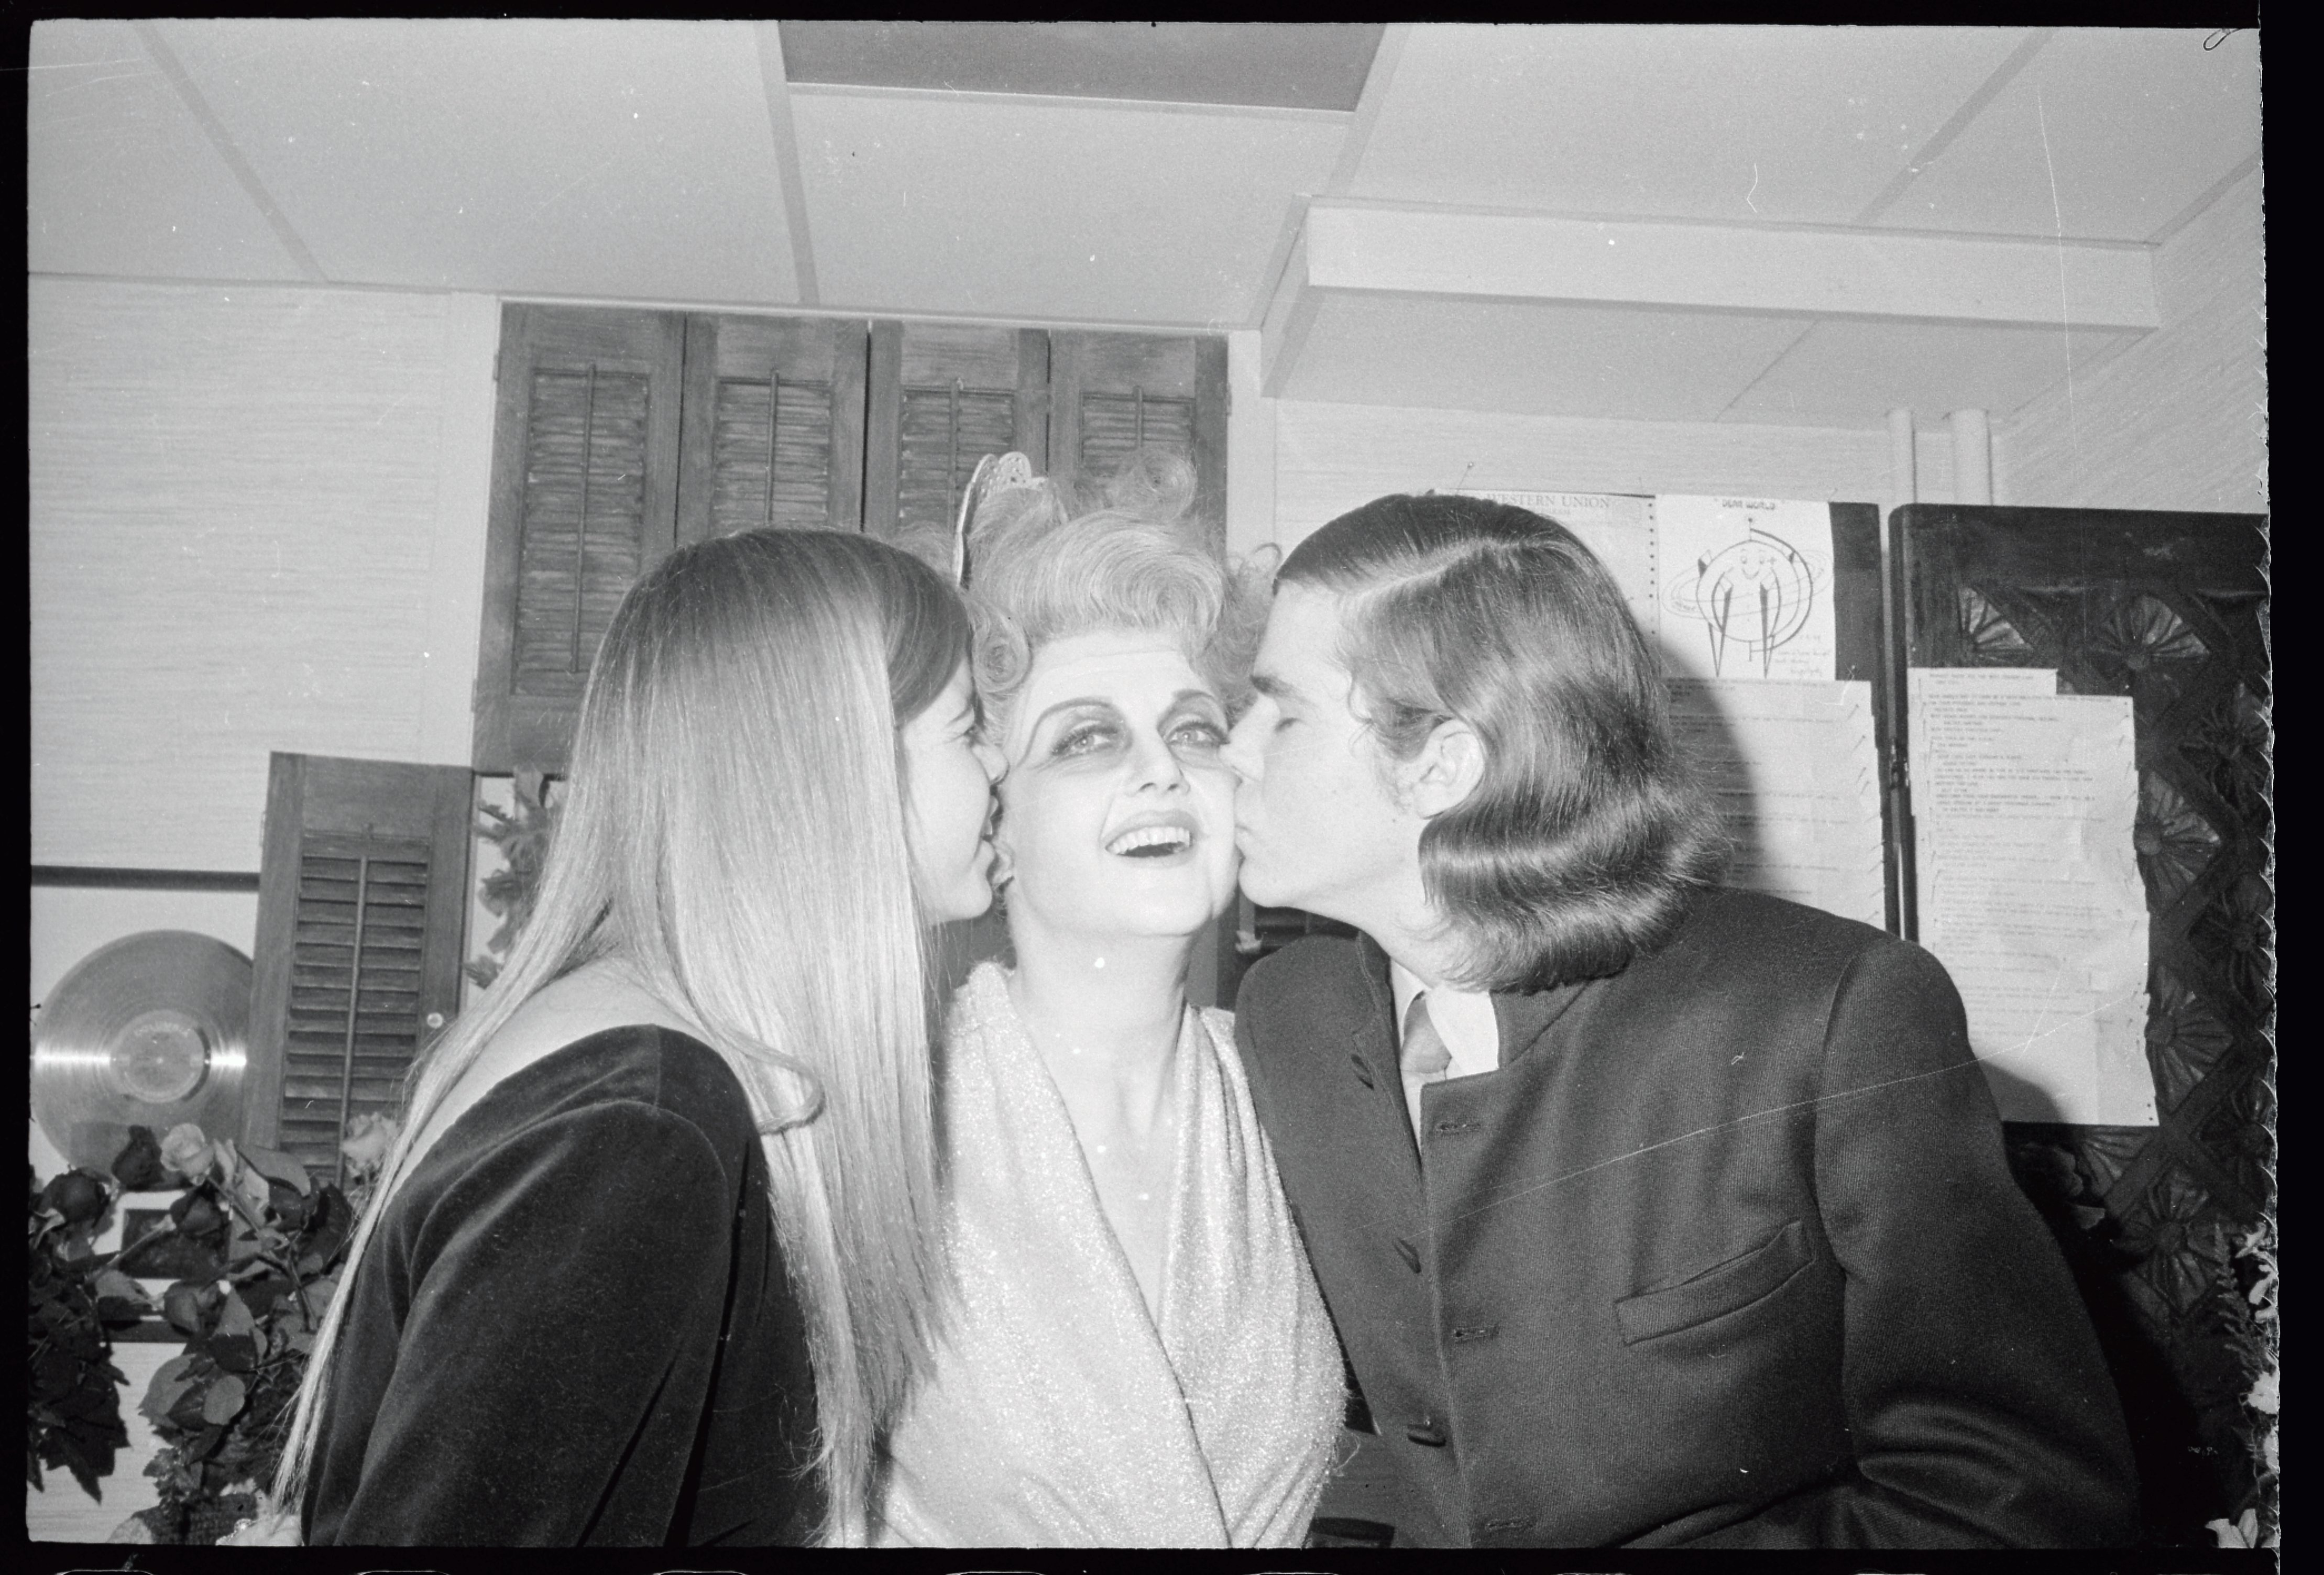 Angela Lansbury and her children, Deidre, 16, and Anthony, 17, after her opening night performance in "Dear World" at the Mark Hellinger Theatre on February 6, 1969 | Source: Getty Images